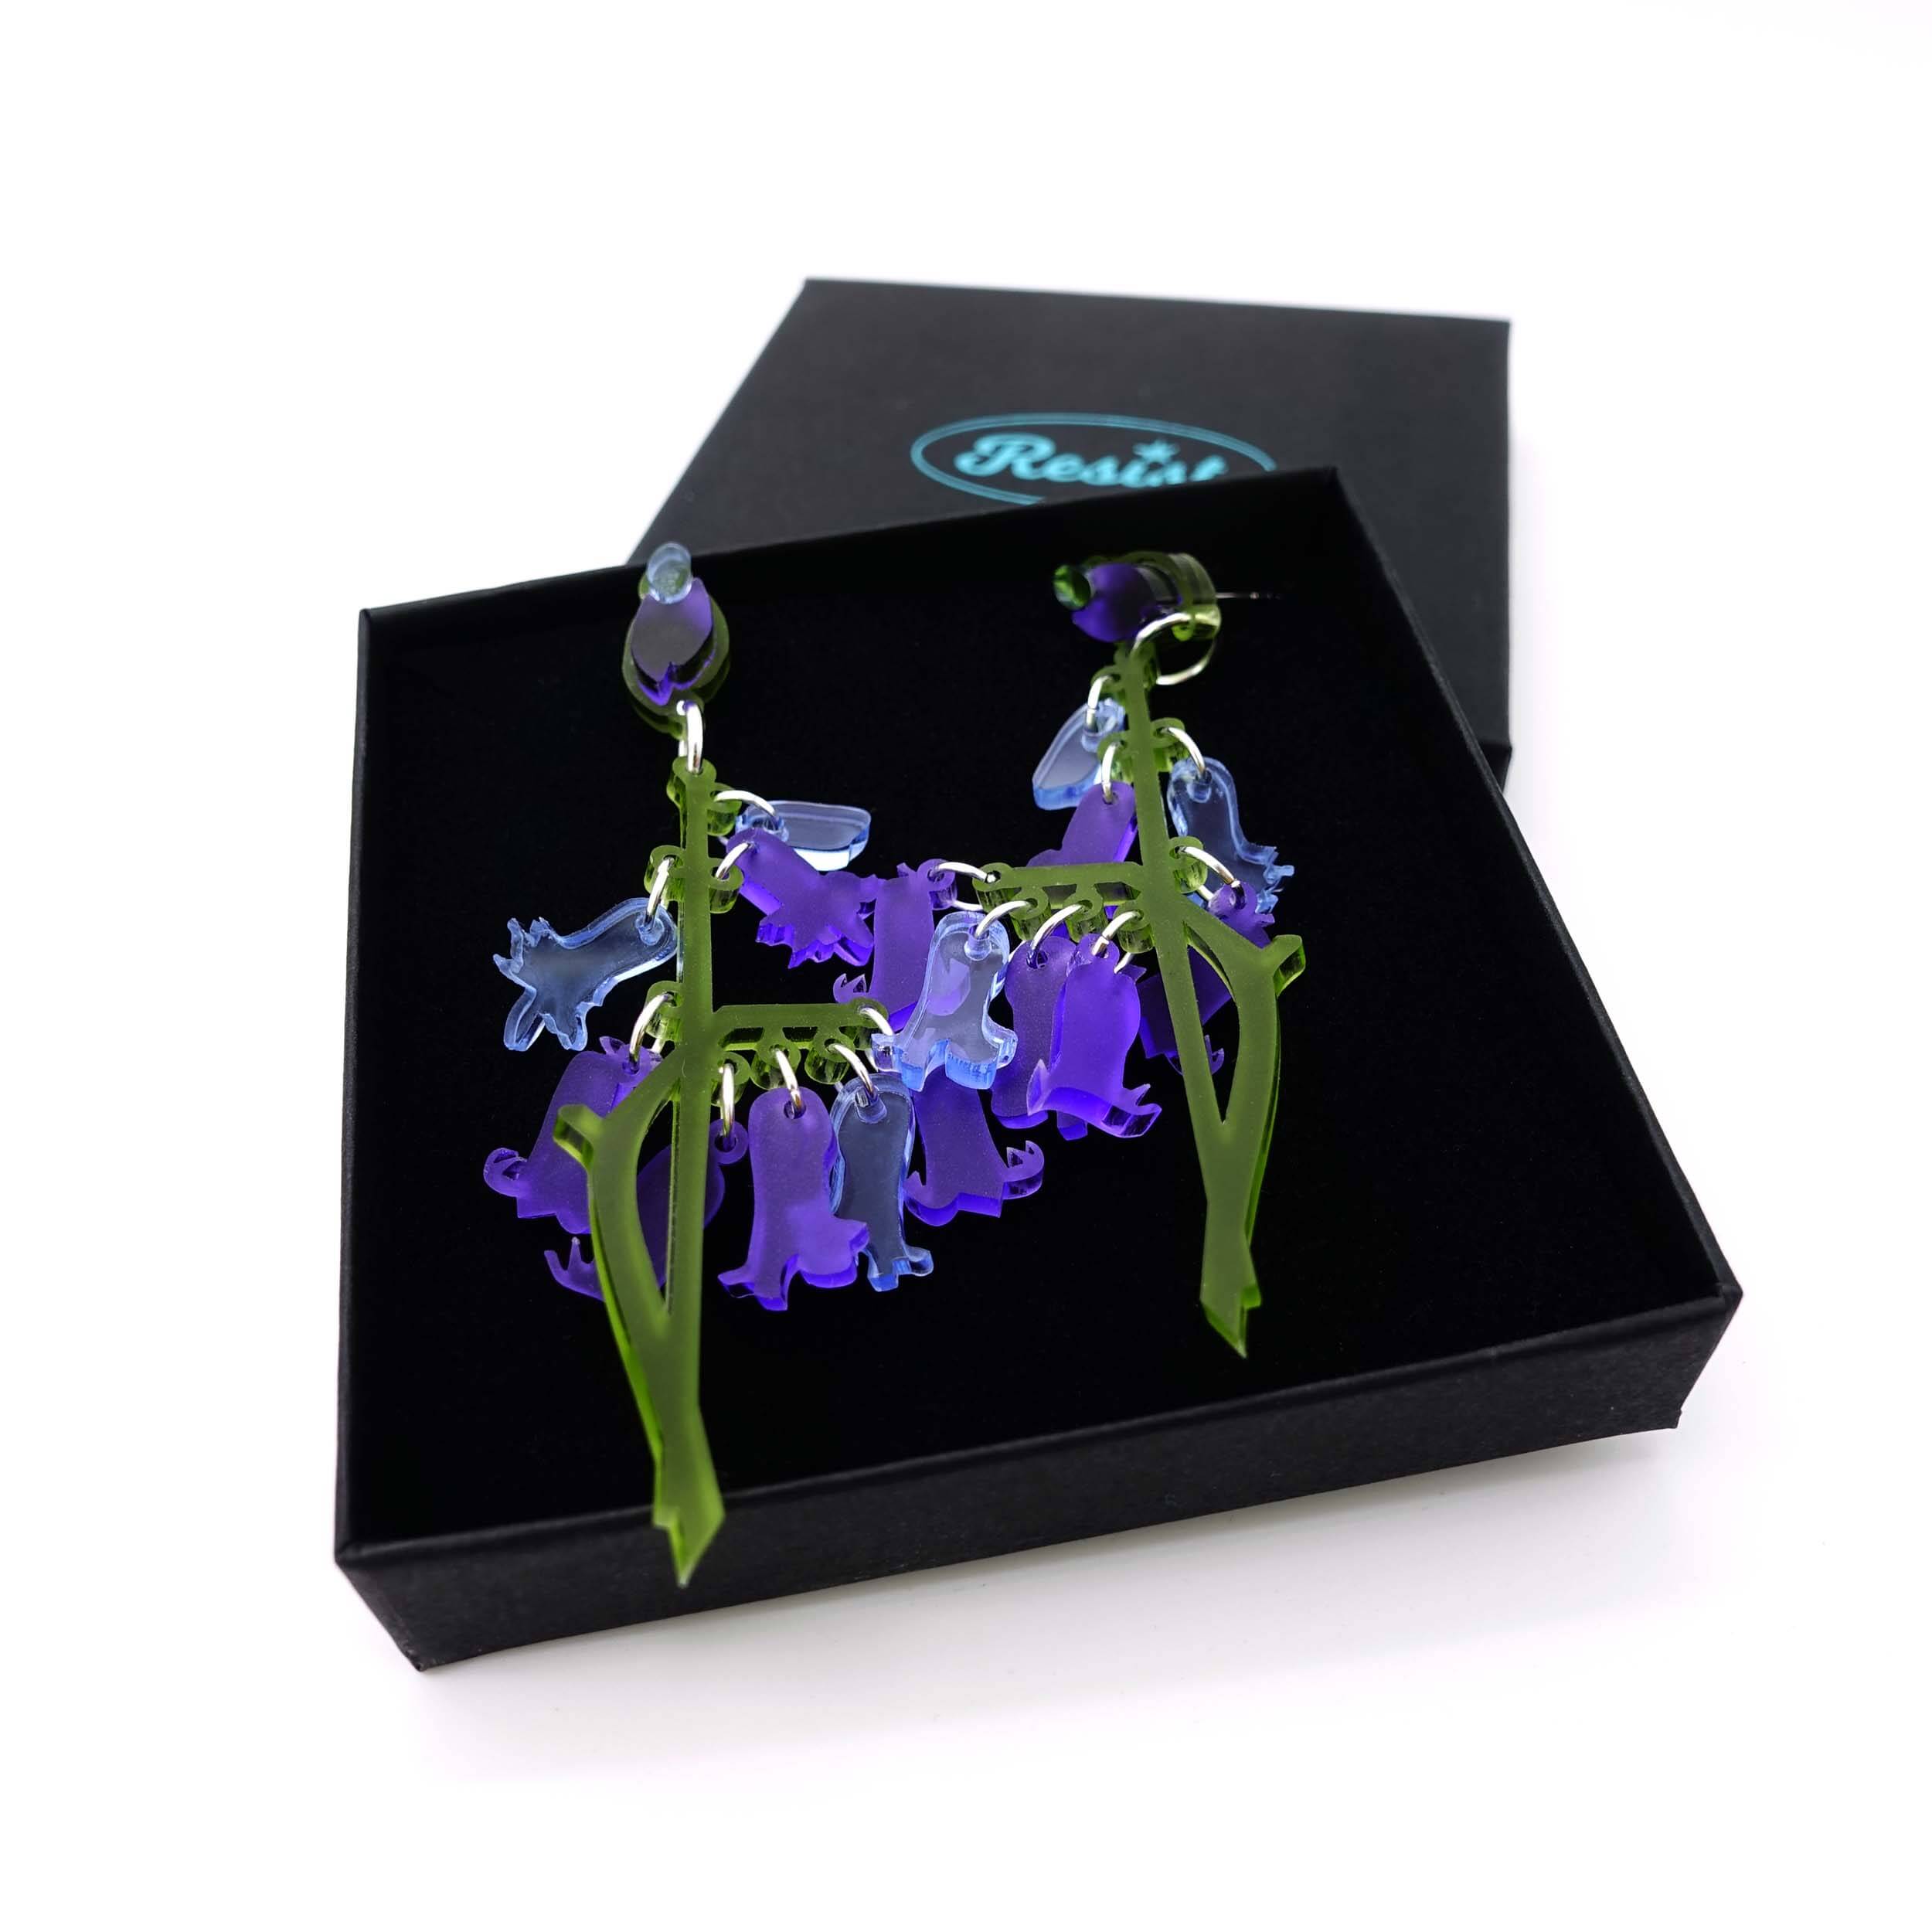 Bluebell earrings by Wear and Resist shown in a gift box. 